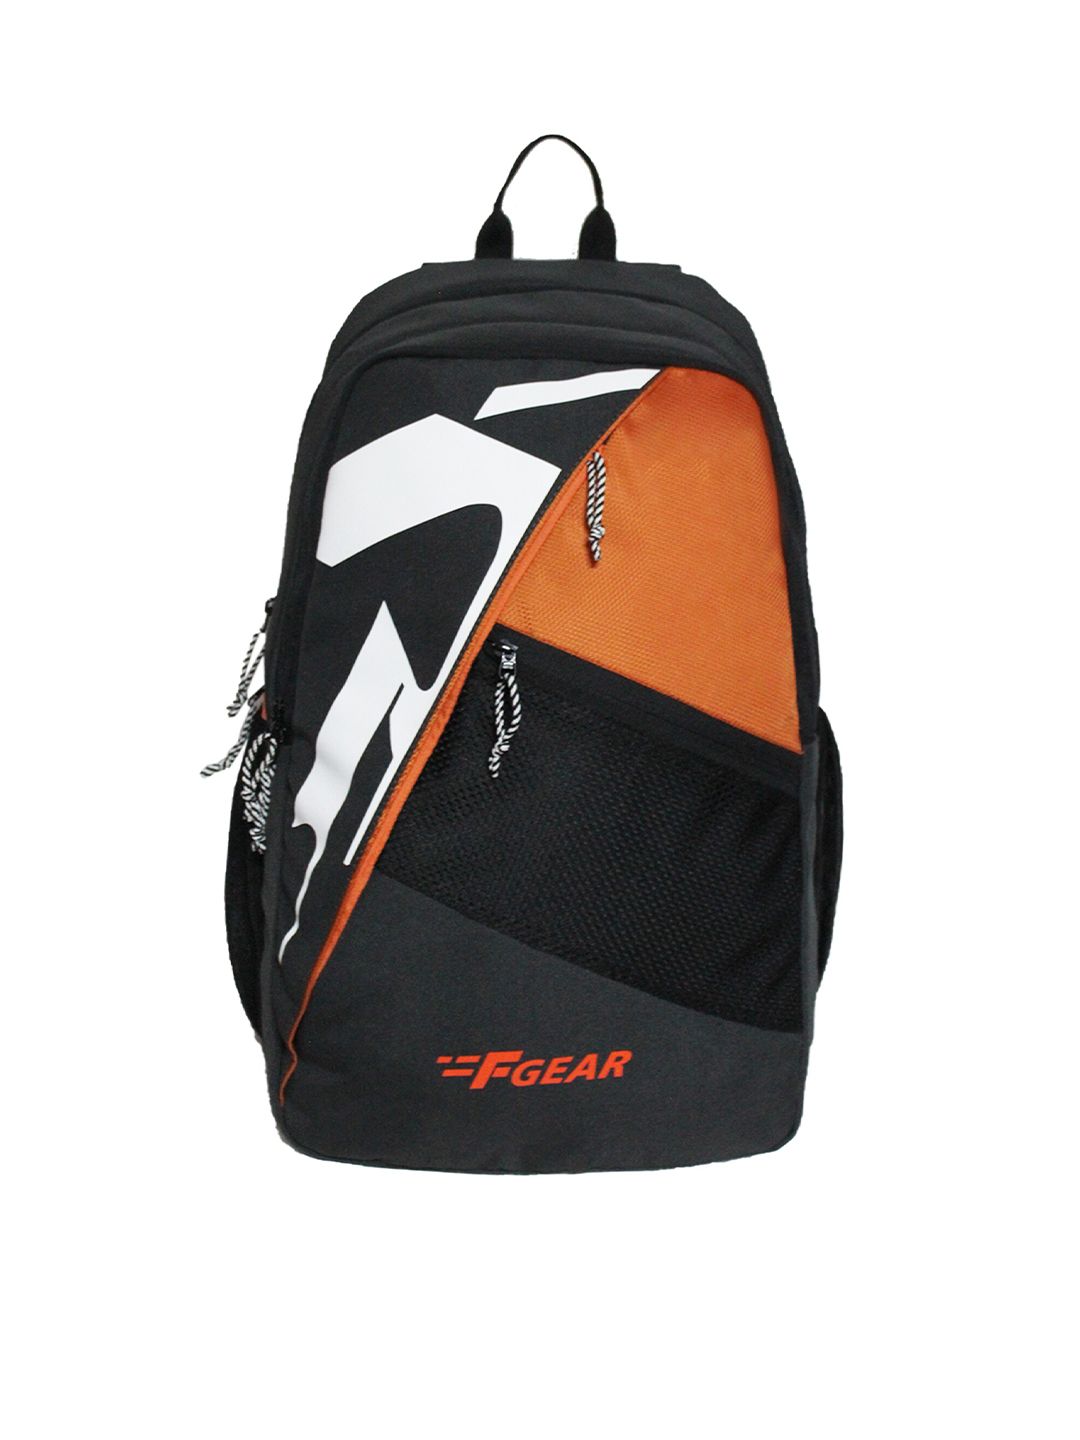 F Gear Unisex Grey & Brown Backpack Price in India